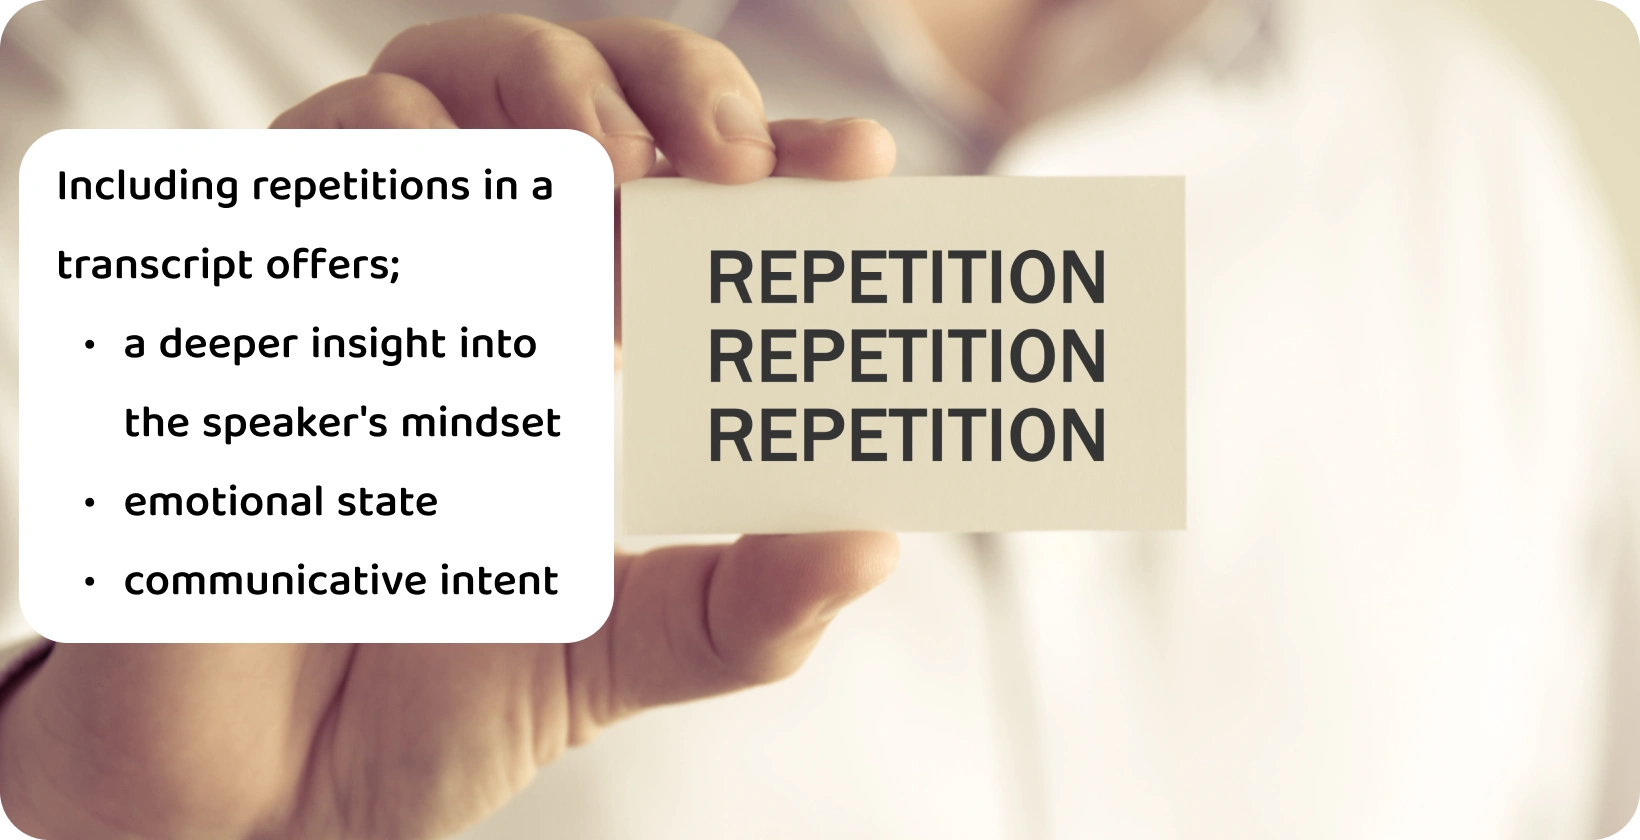 A close-up of a hand holding a card with the word 'Repetition', illustrating the concept of repetitions in a verbatim transcript.